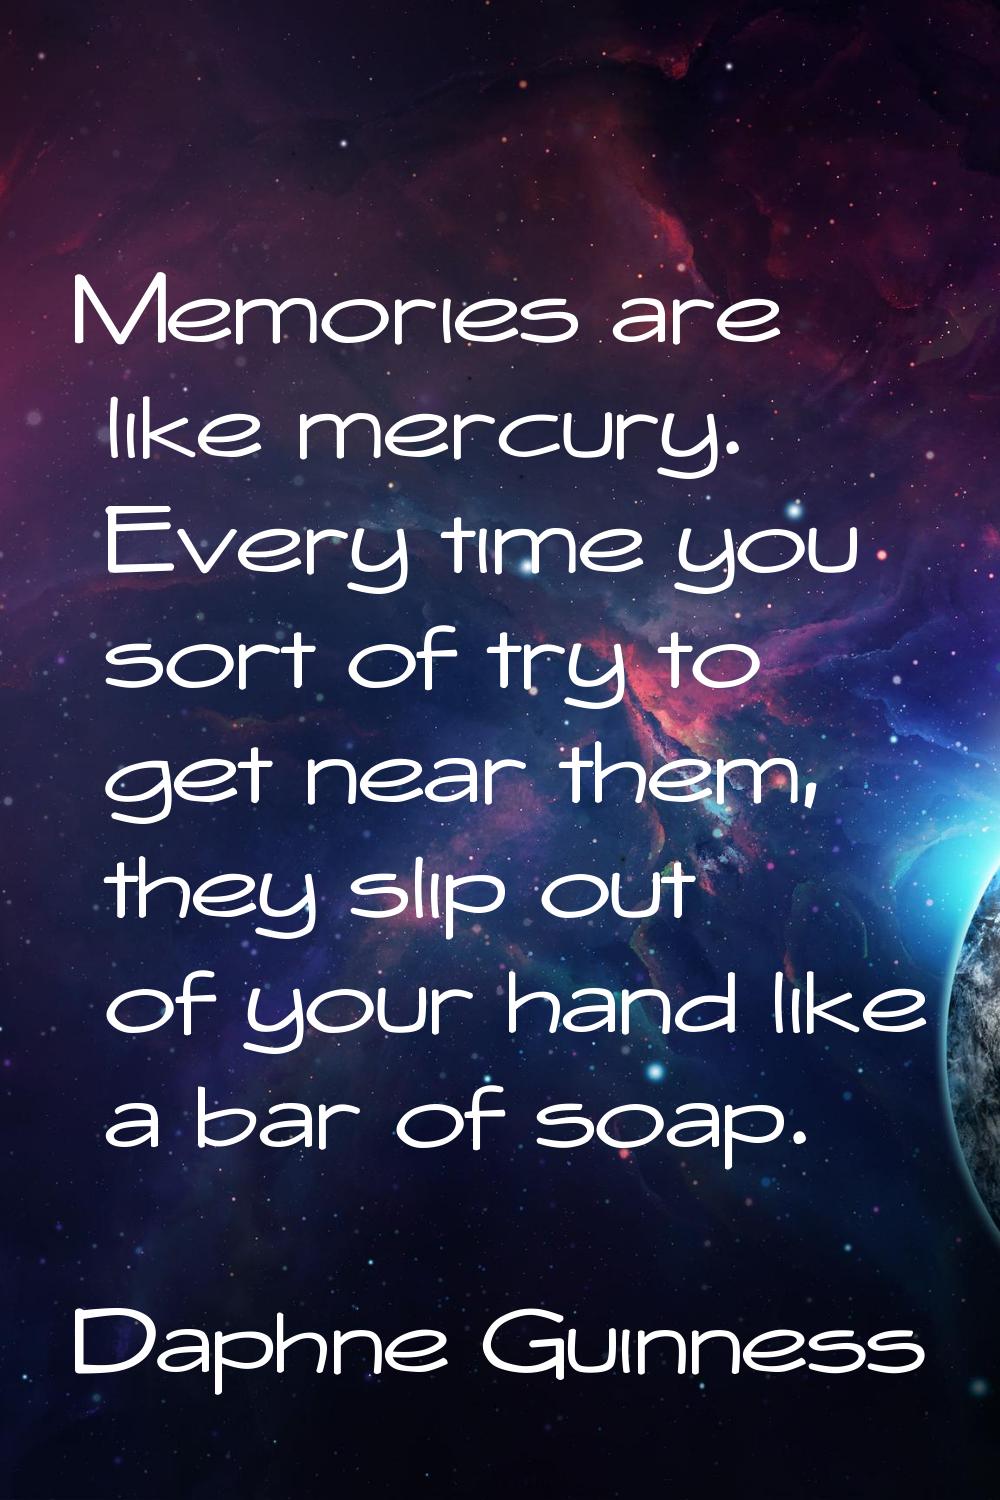 Memories are like mercury. Every time you sort of try to get near them, they slip out of your hand 